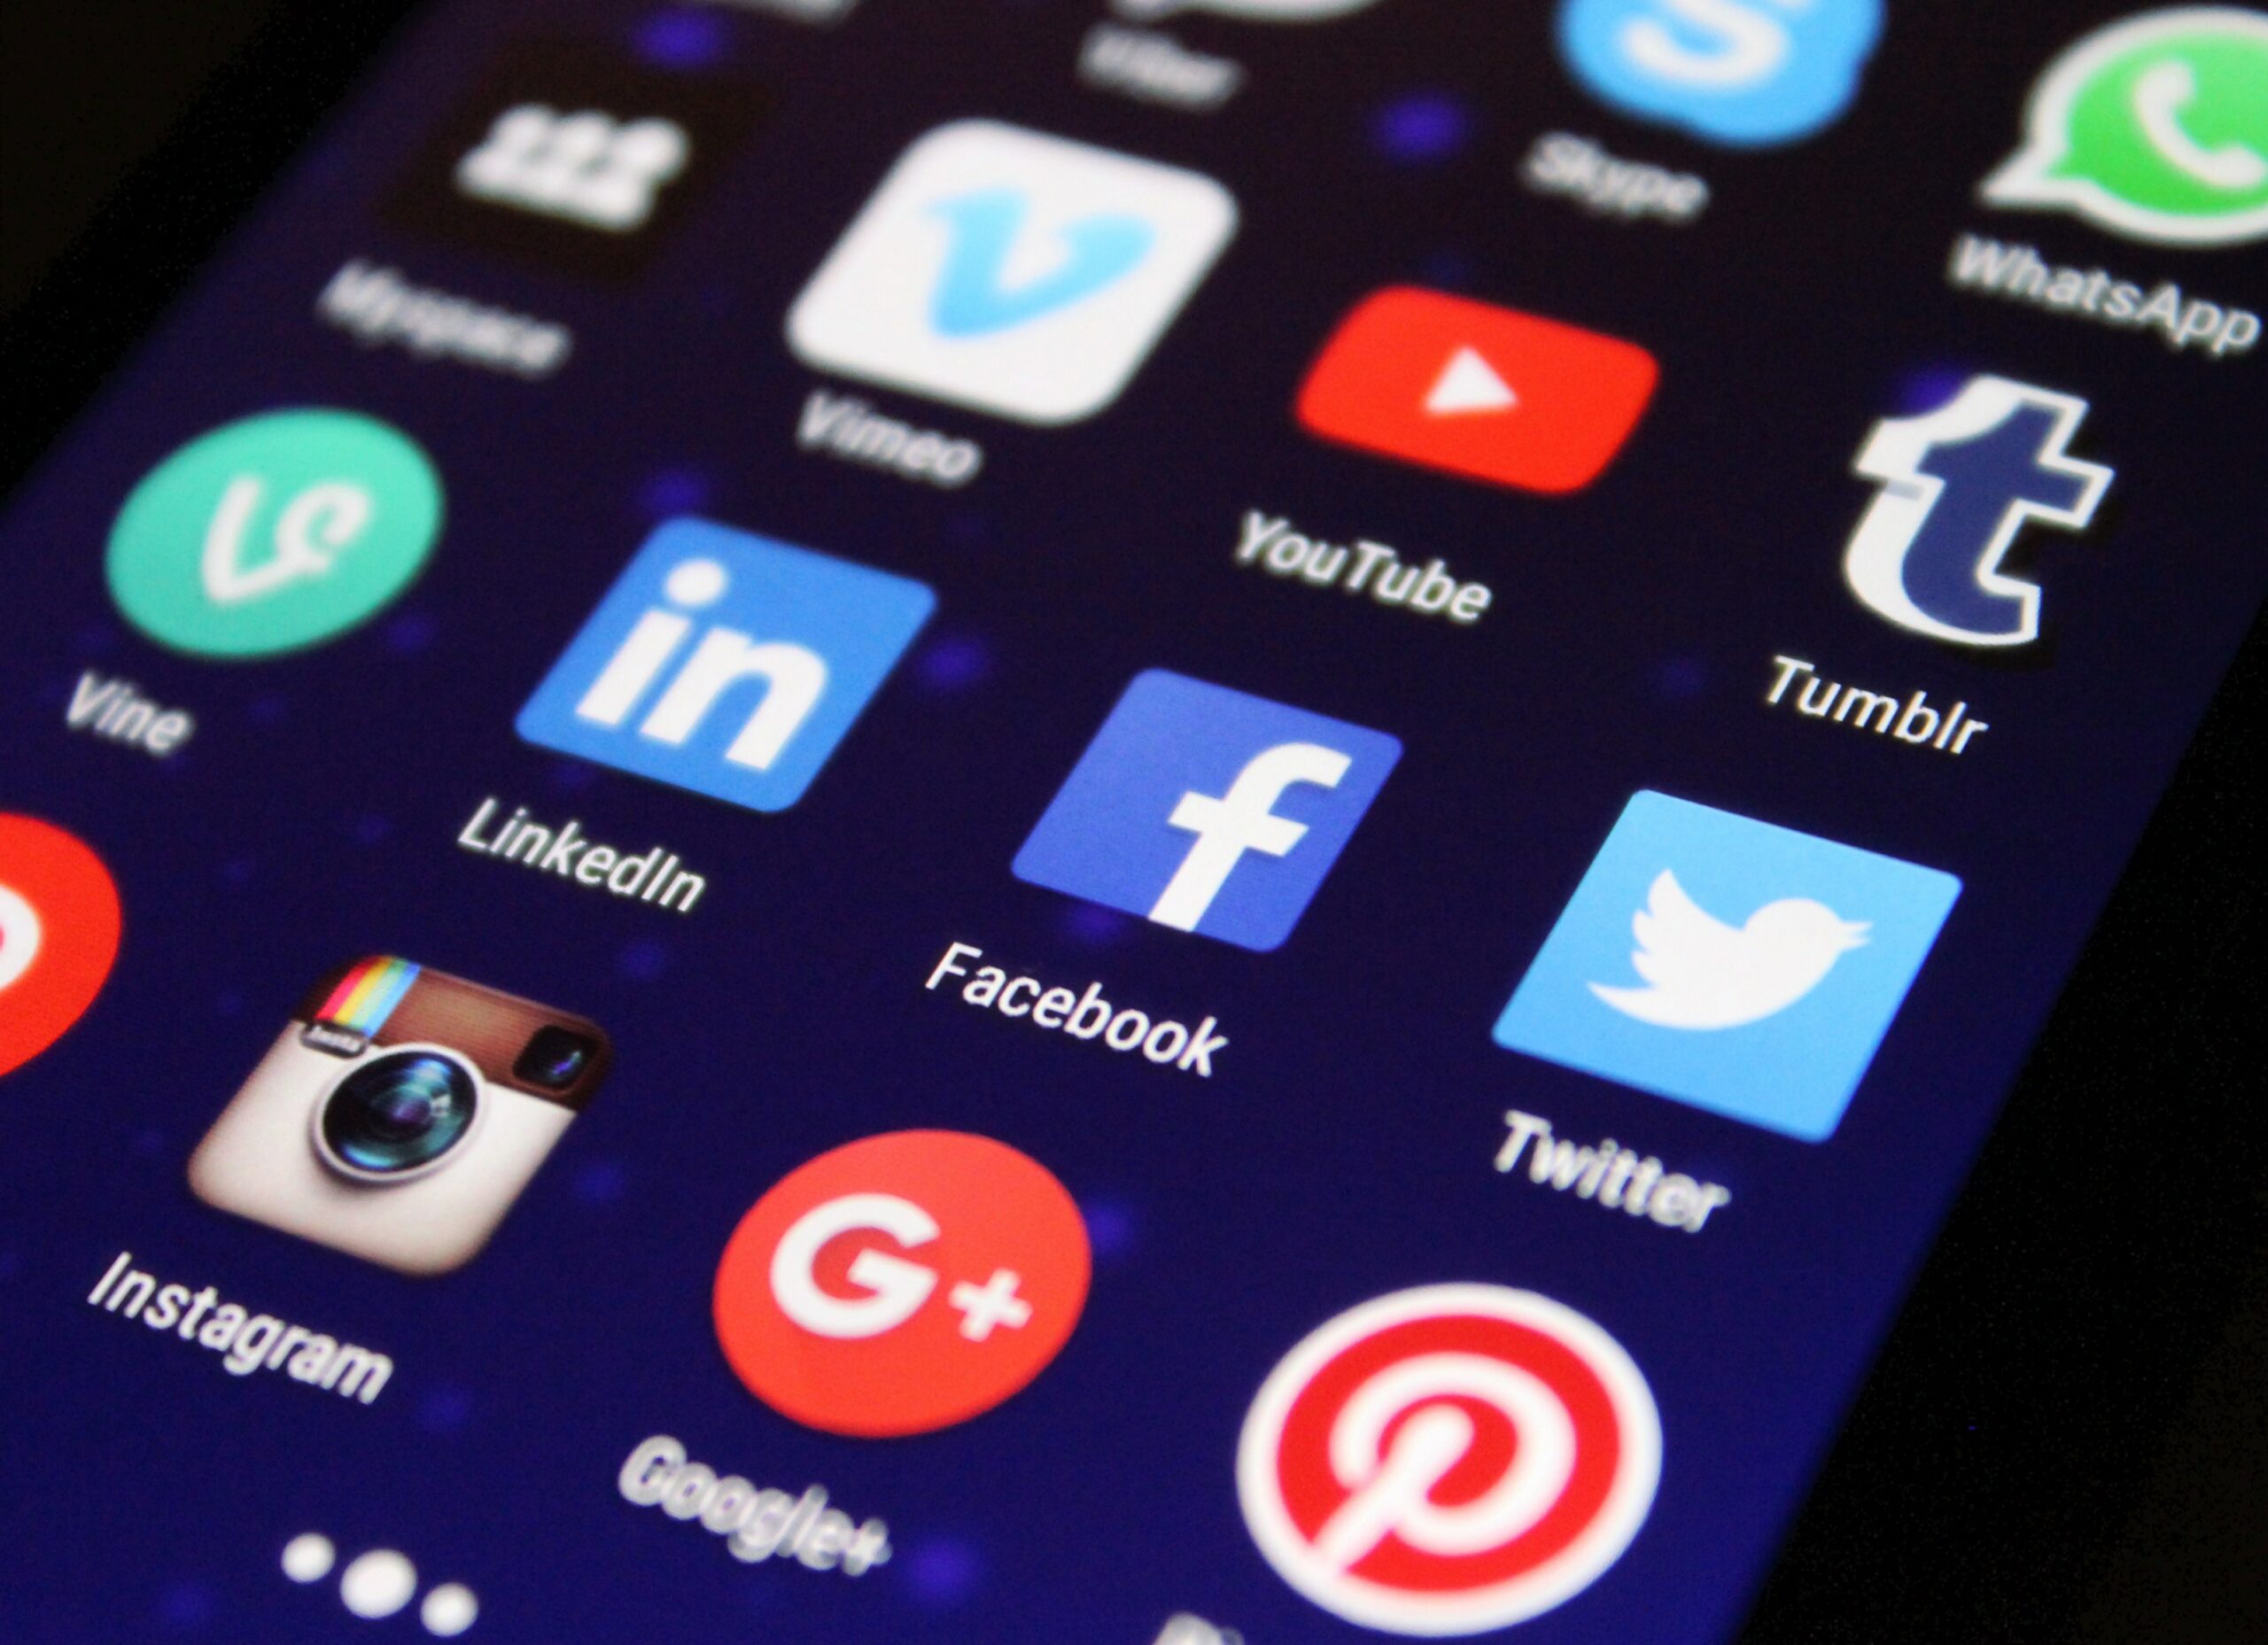 15 Best Social Media Giveaway Apps Reviewed - ViralSweep